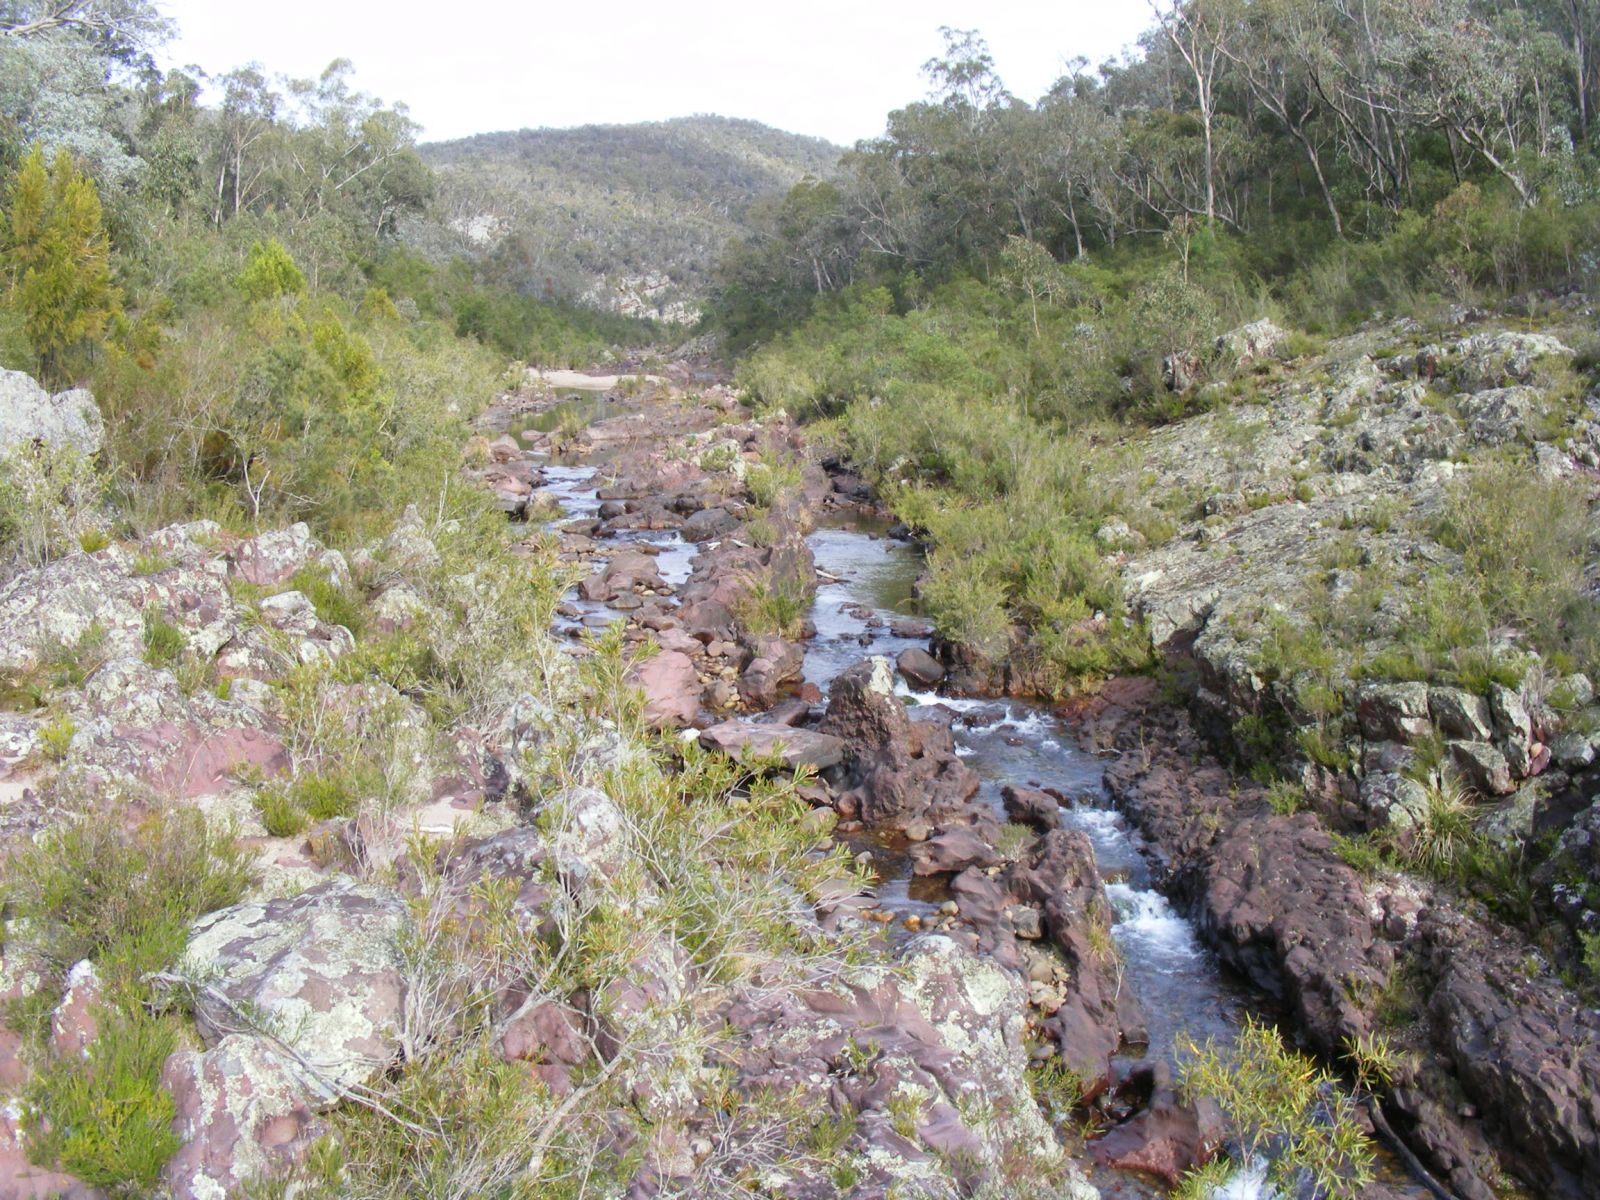 A view of the Channels Gorge